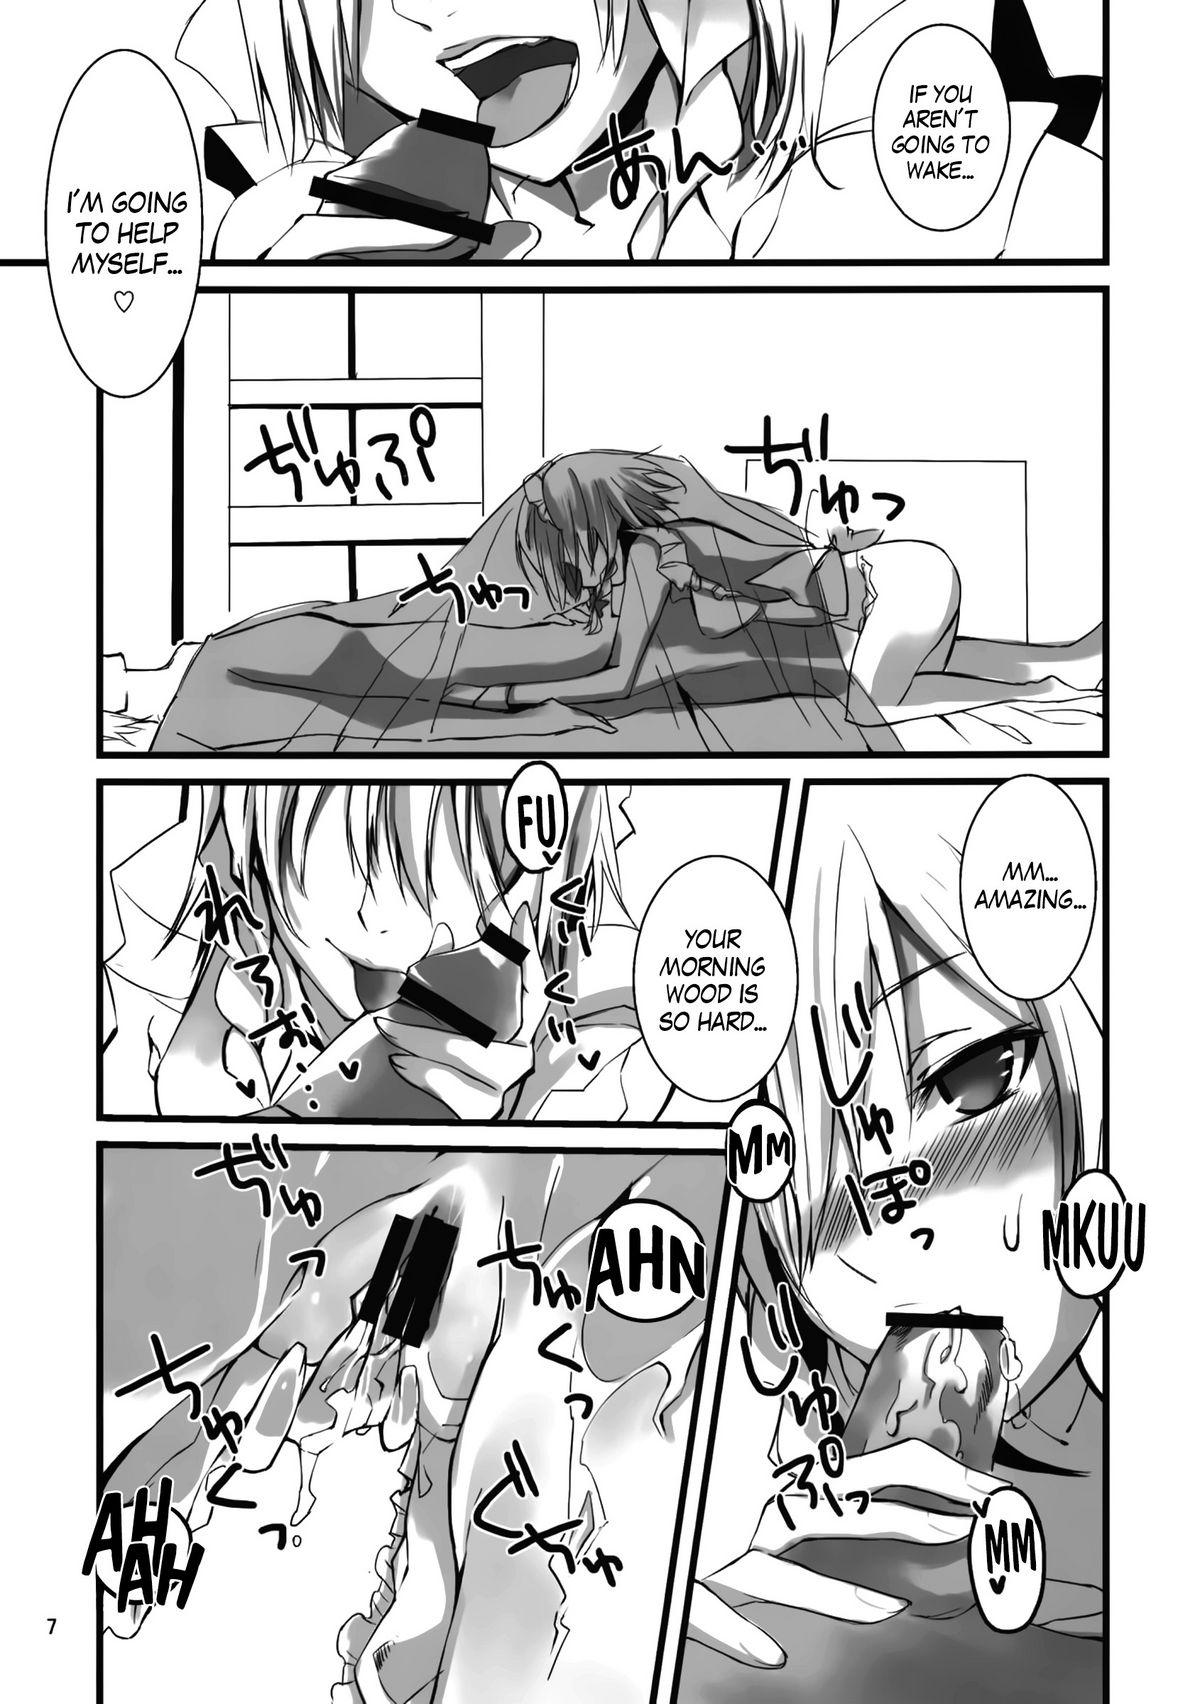 Tittyfuck 1 day my maid - Touhou project Glam - Page 7